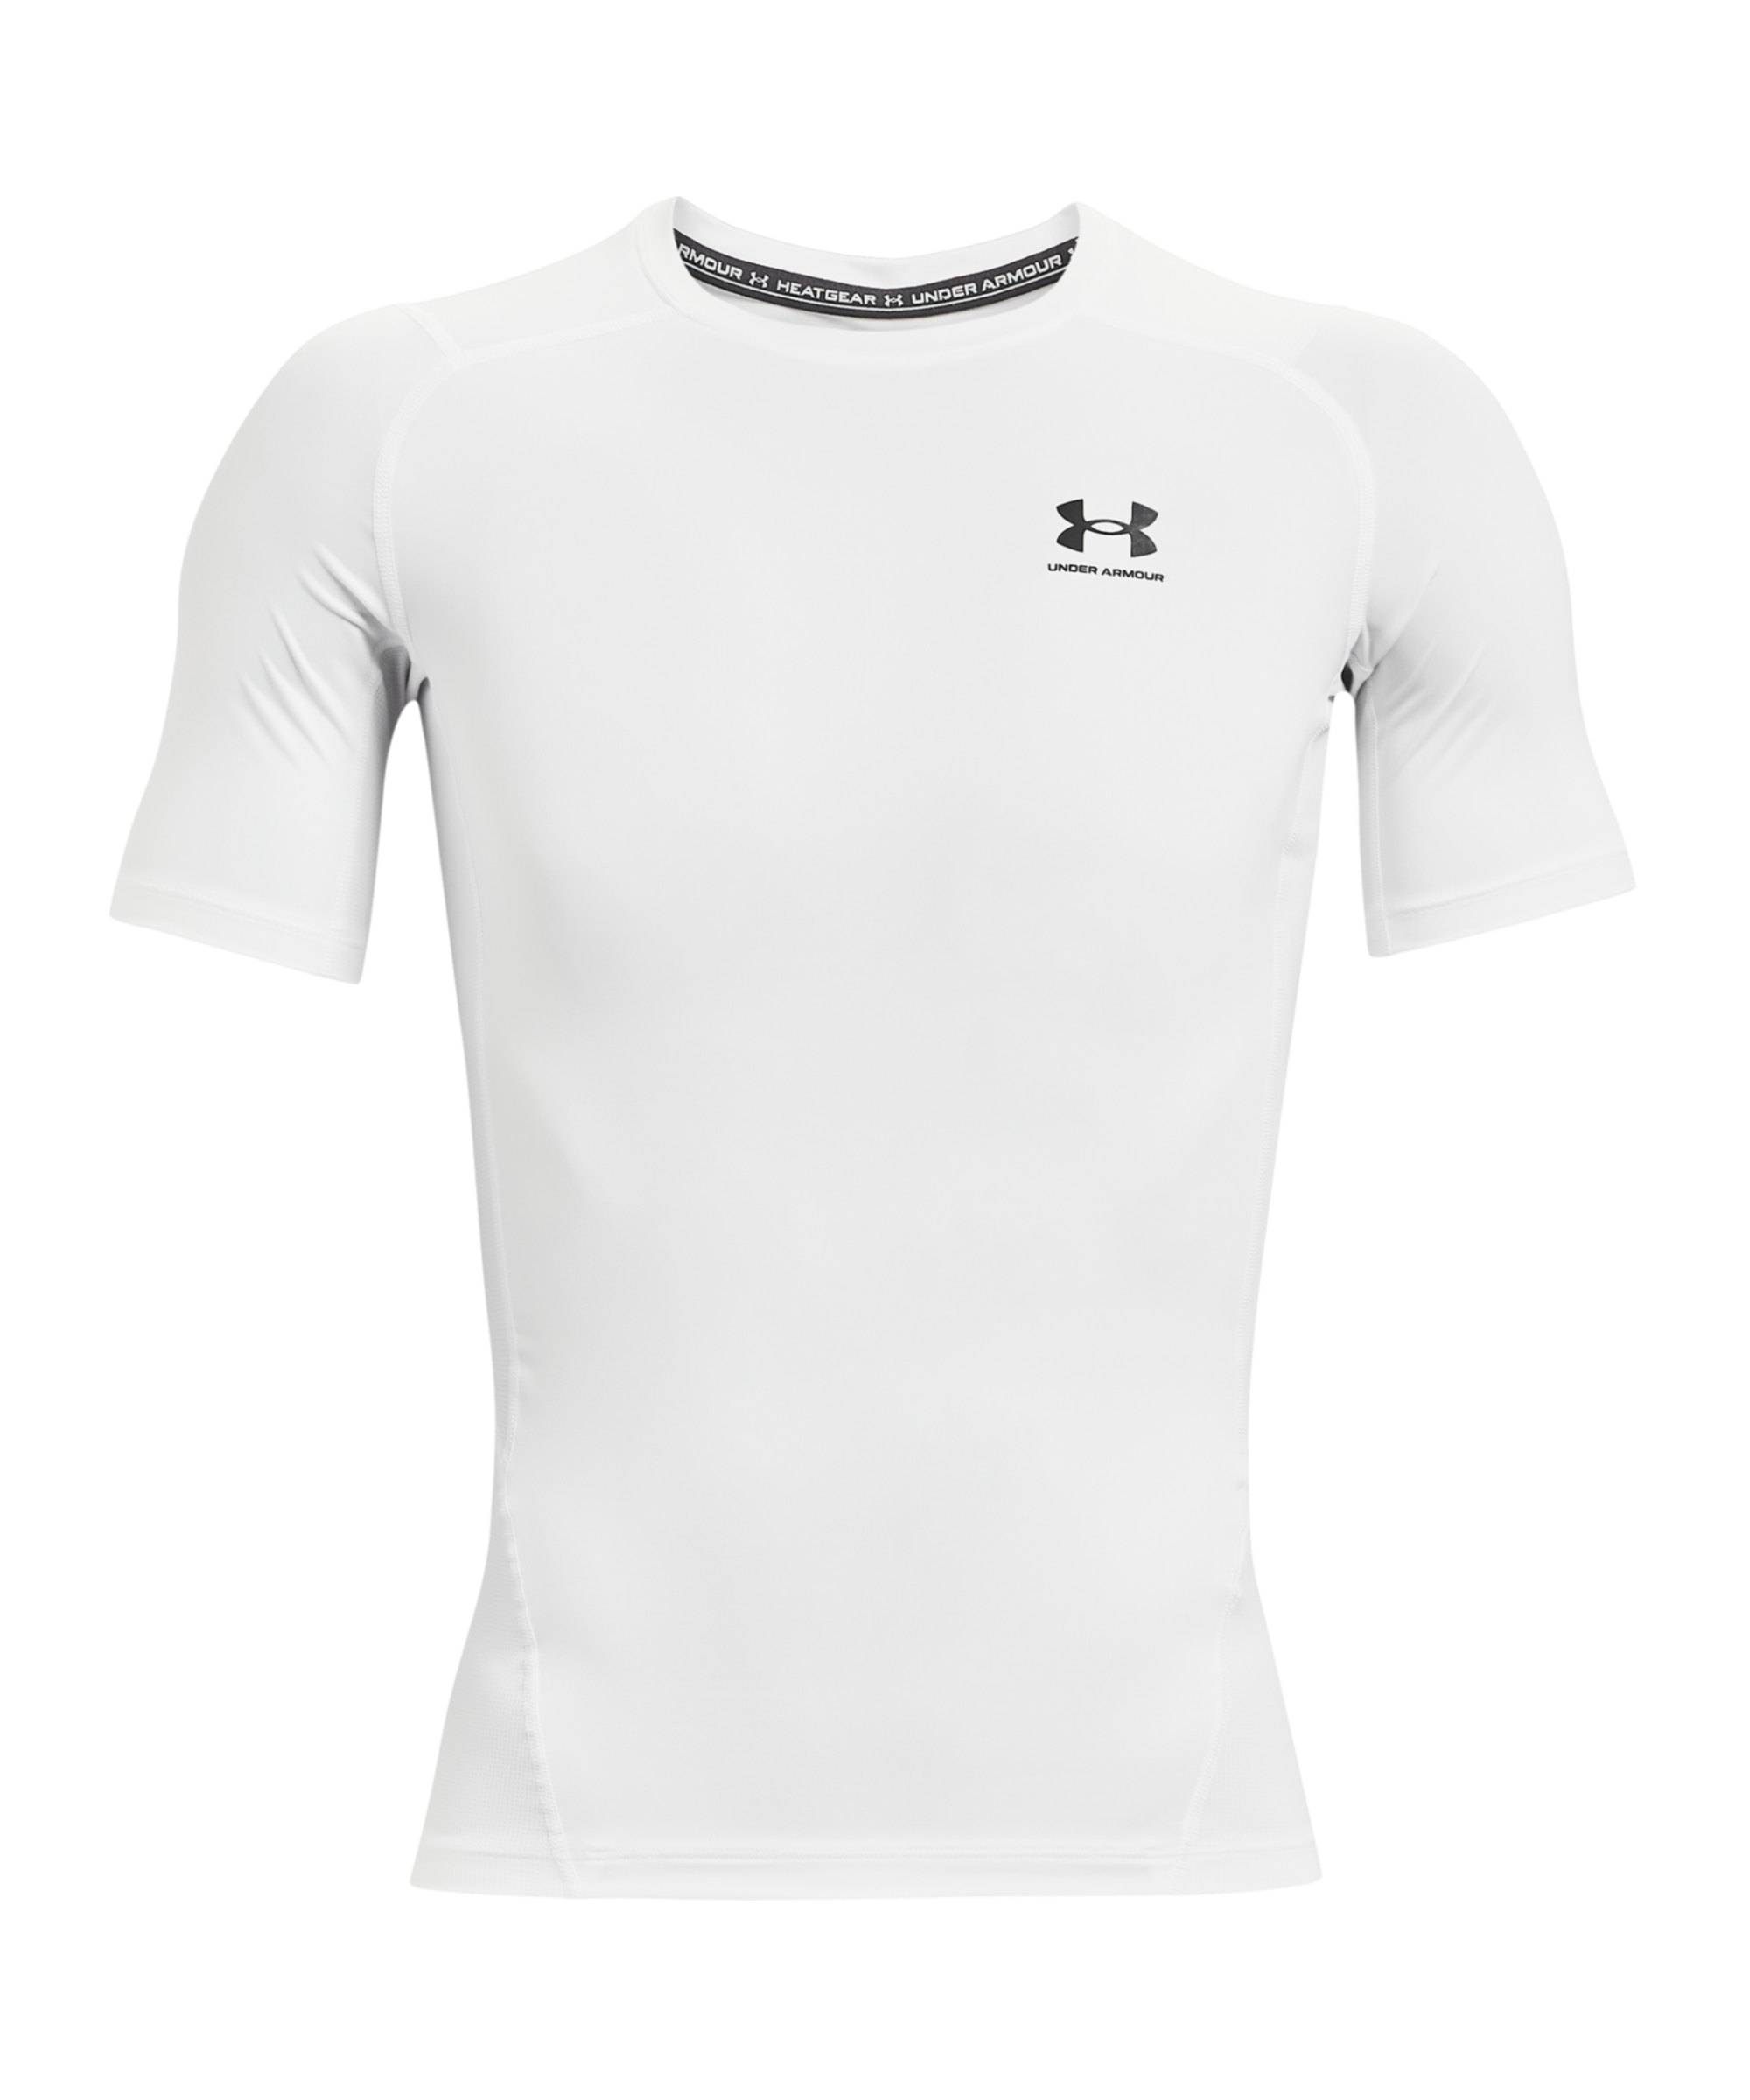 Under Armour T-Shirt F100 weiss HG Compression